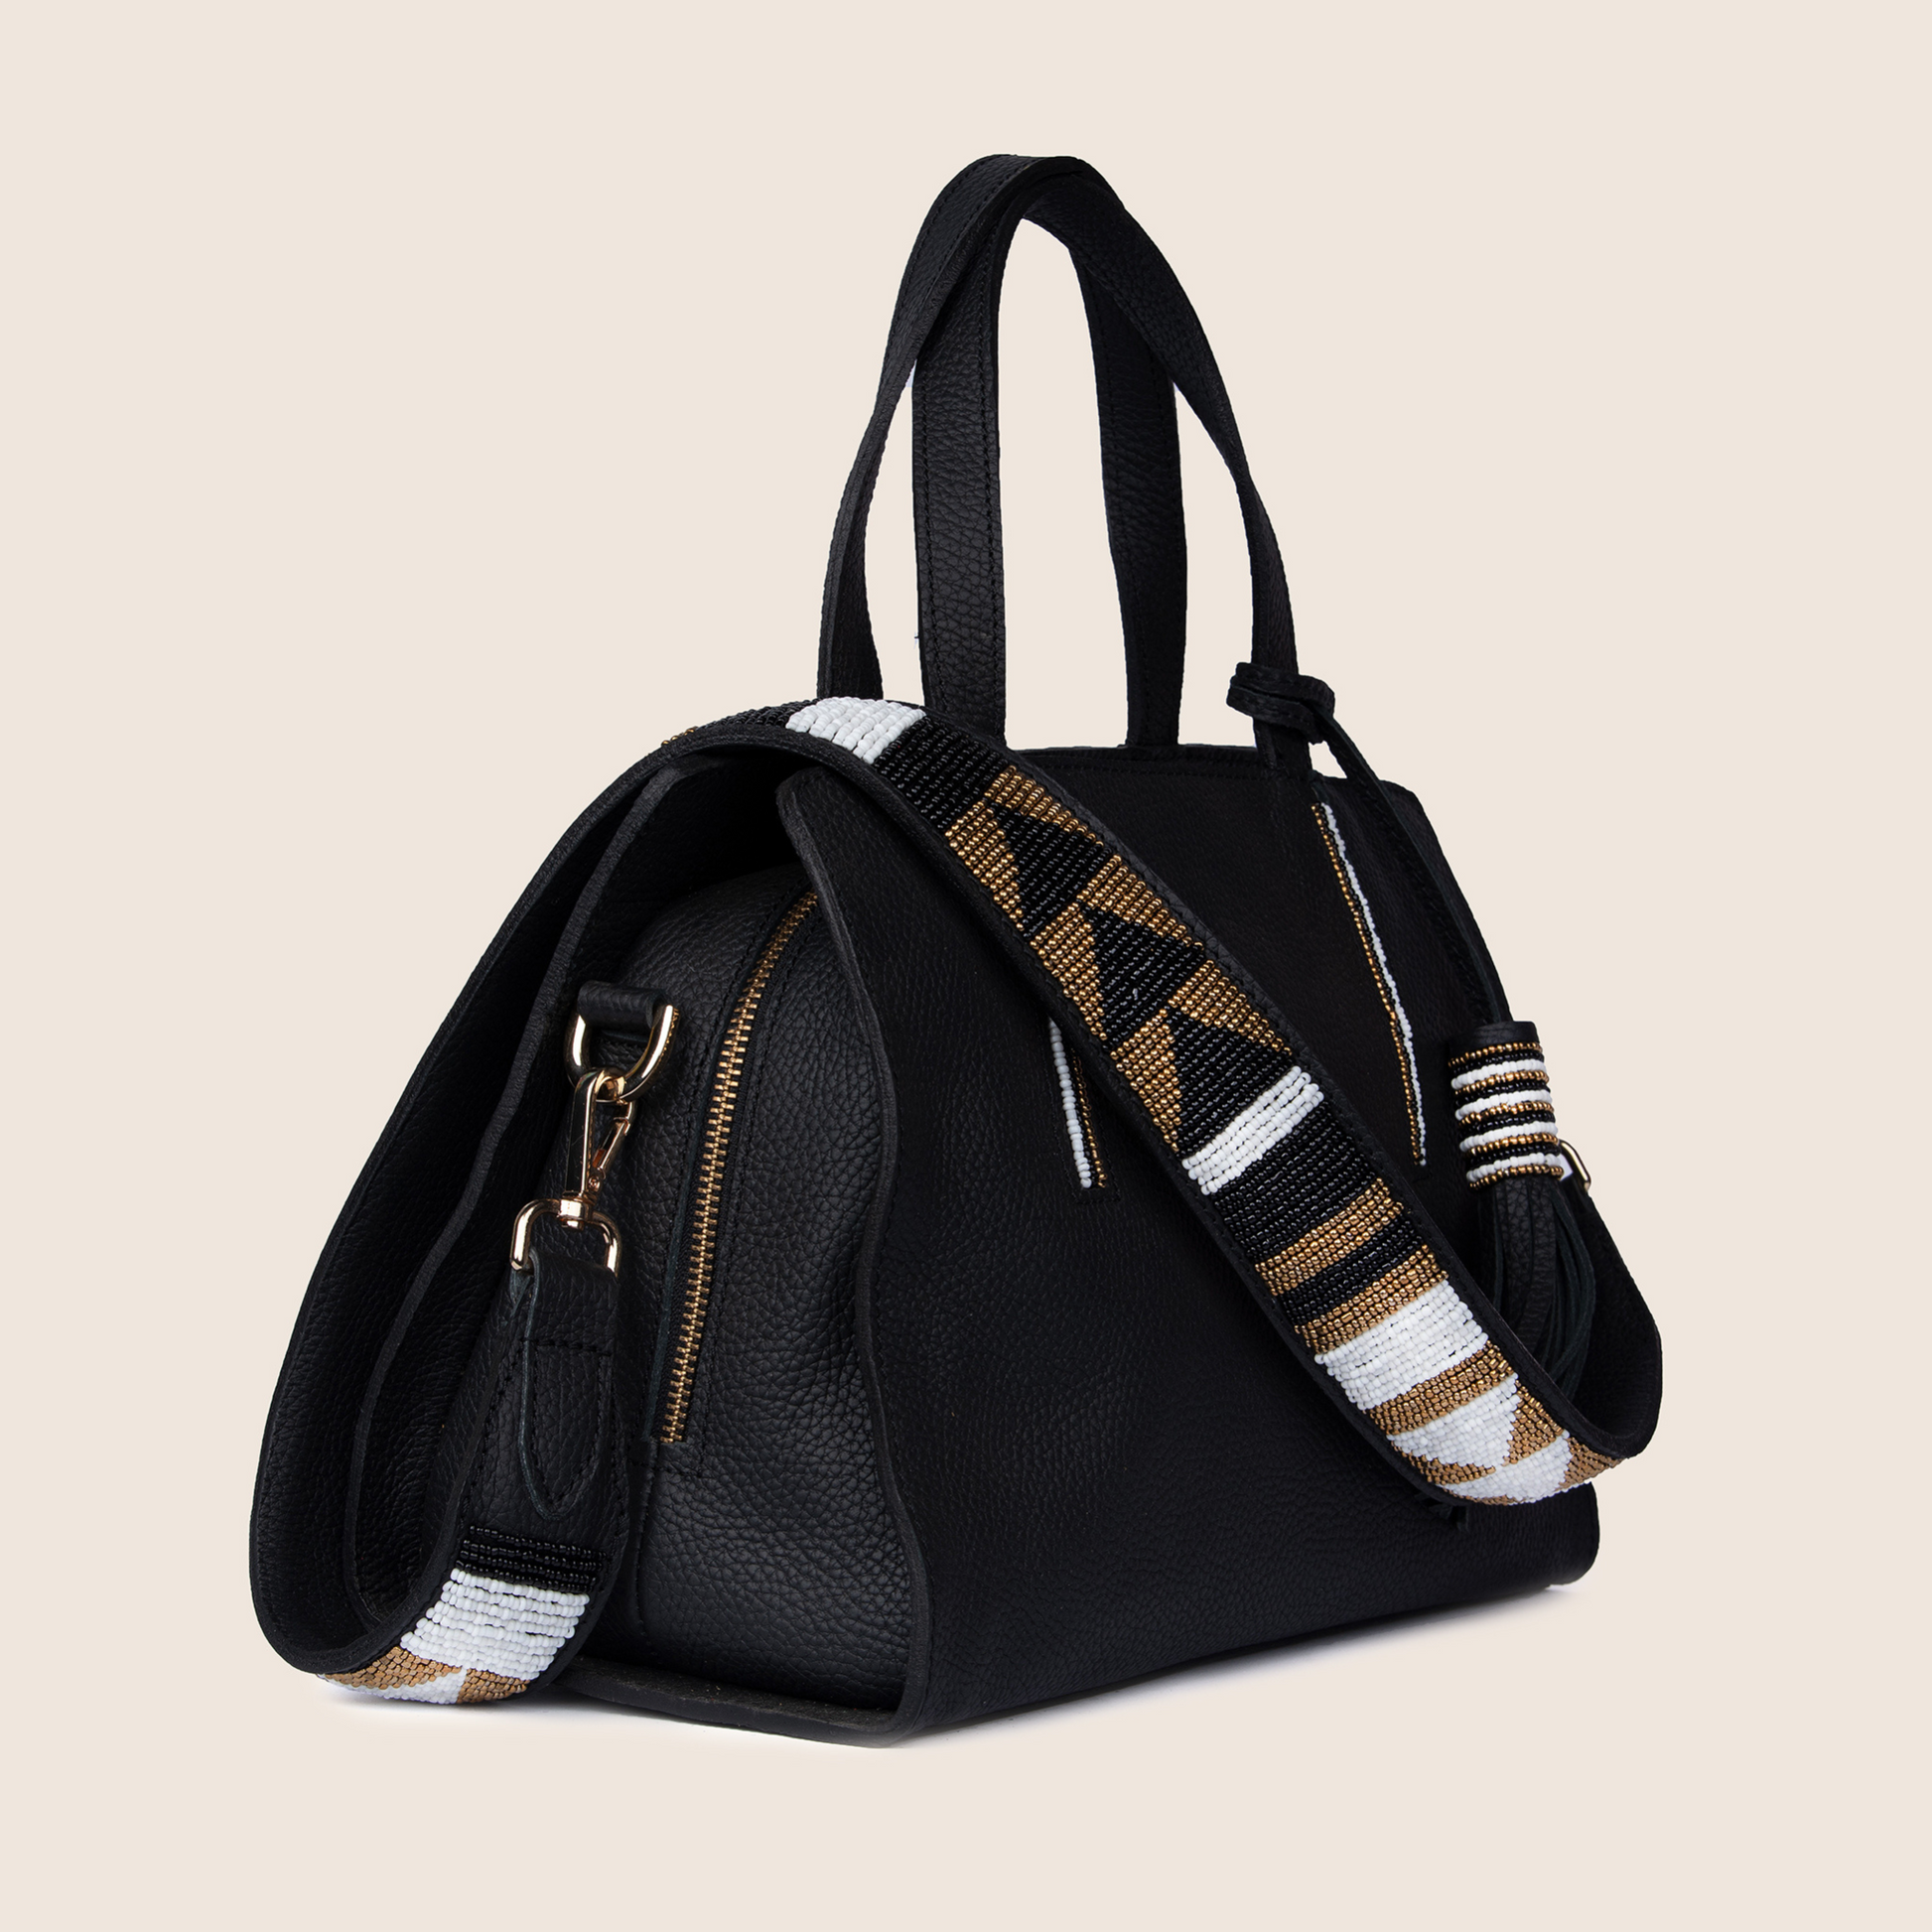 Kate bag in black milled leather and with Maasai beaded strap.